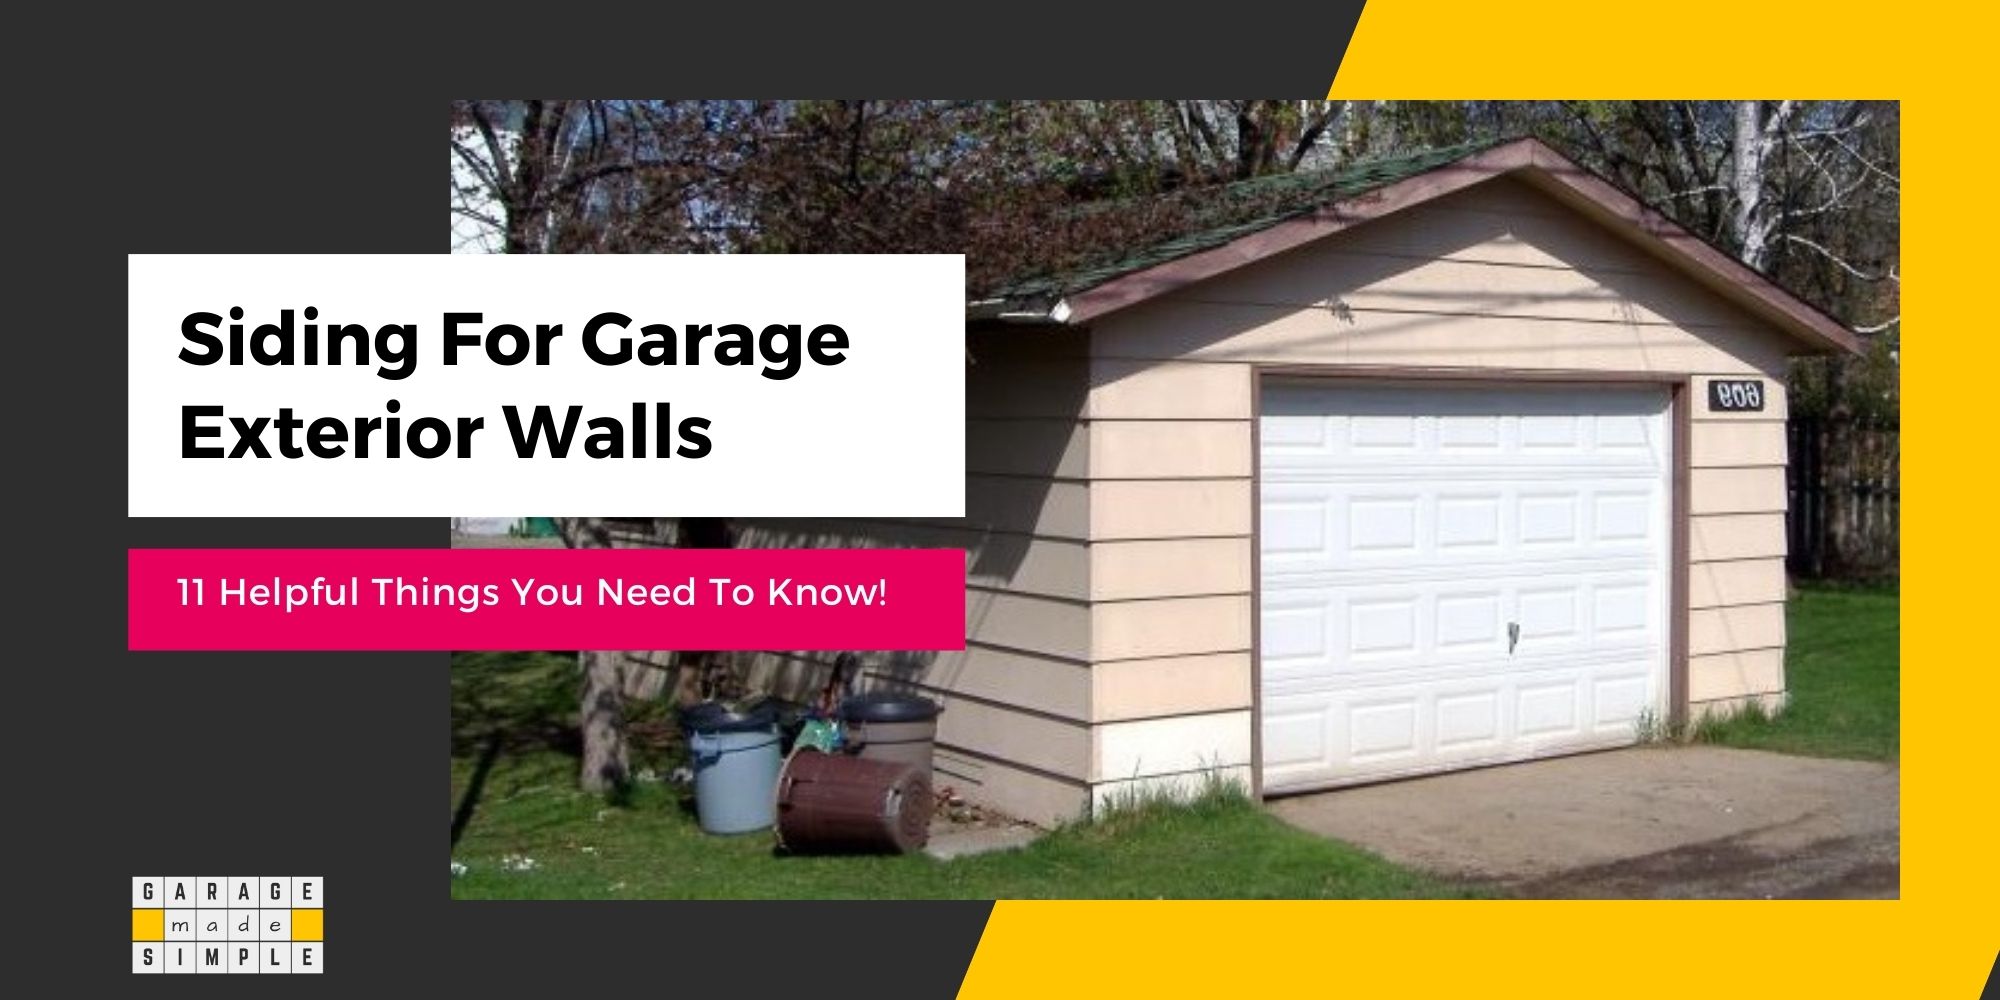 Siding For Garage Exterior Walls: 11 Helpful Things Worth Knowing!